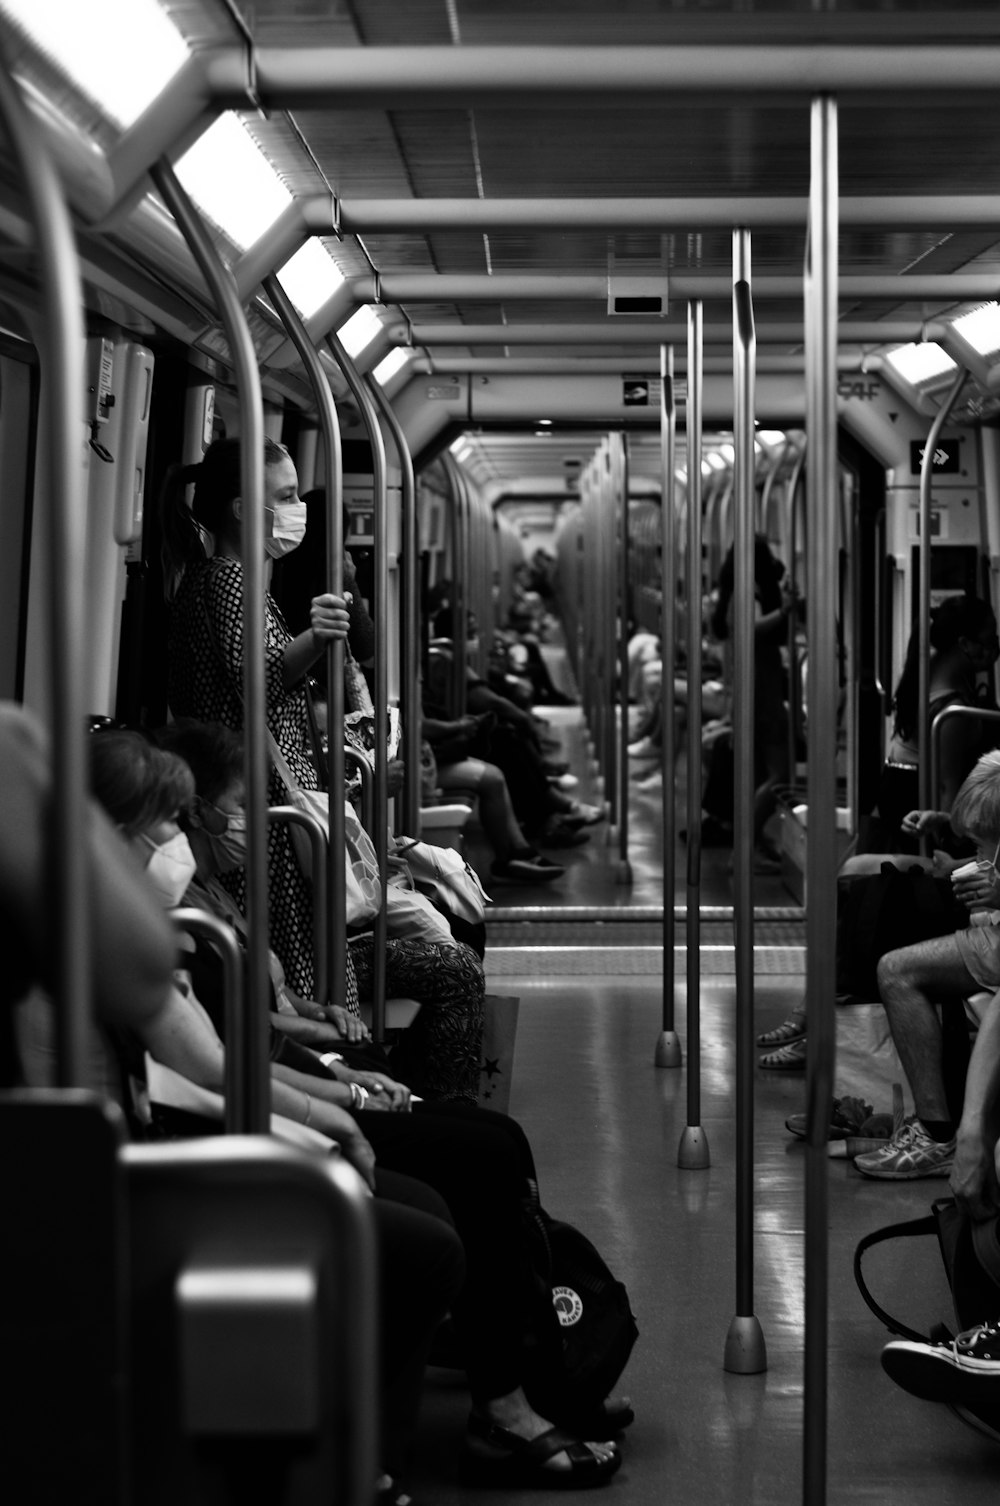 grayscale photo of people sitting on train